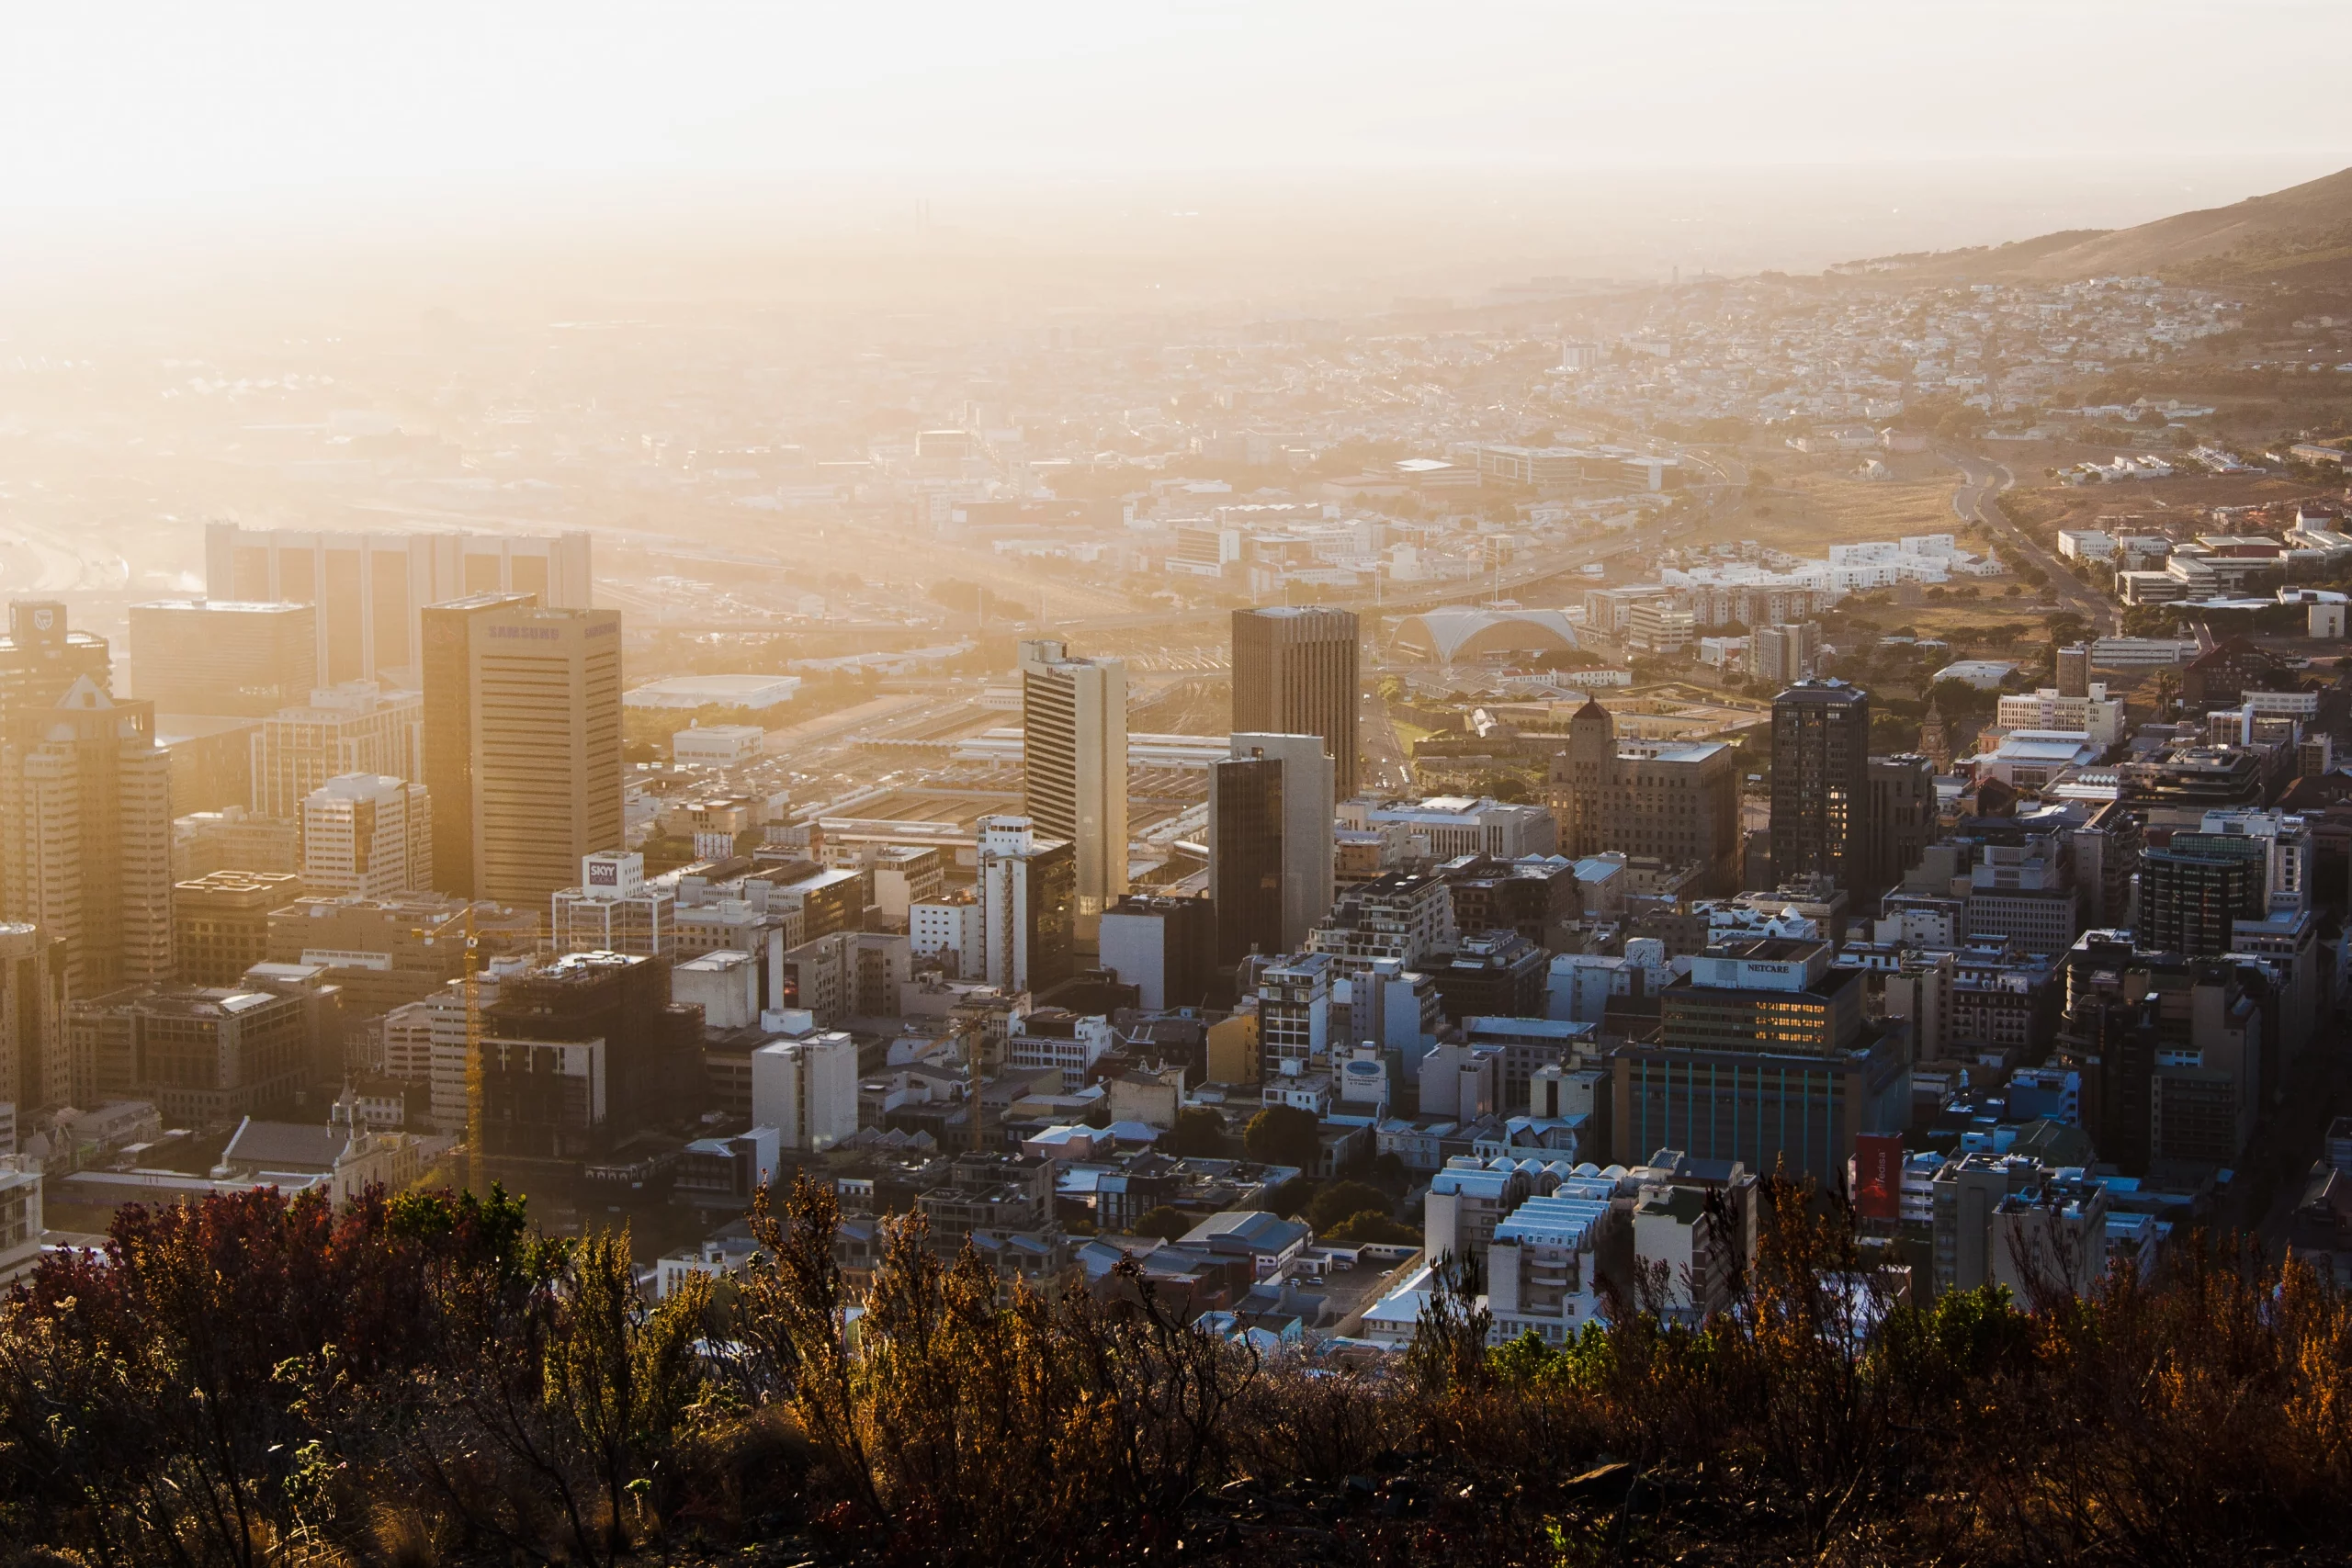 Cape Town, South Africa at Sunrise